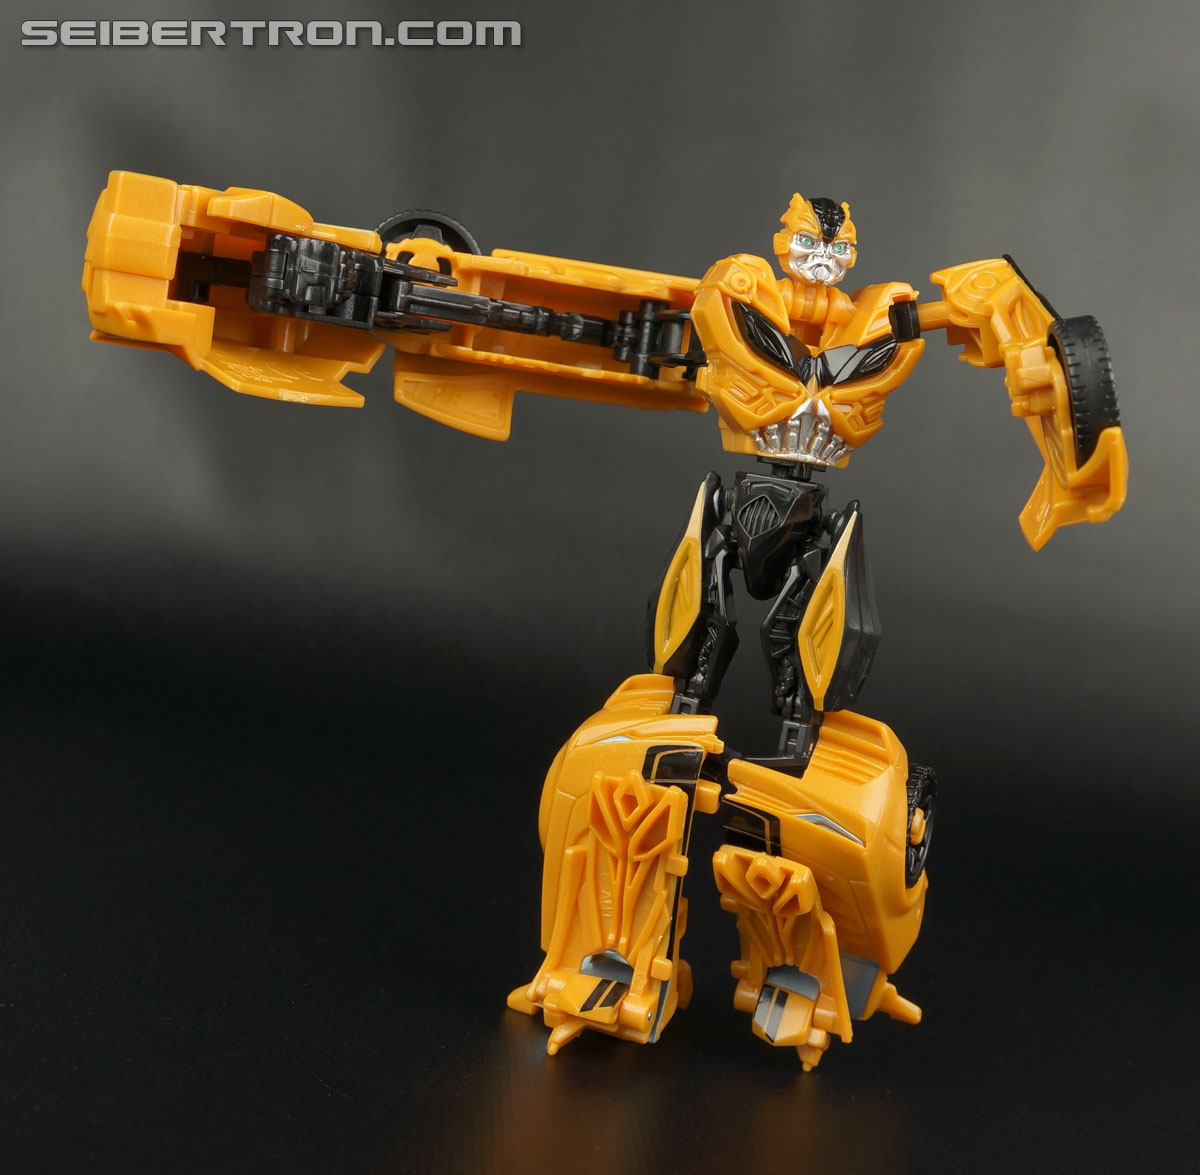 Transformers Age of Extinction: Robots In Disguise Power Punch Bumblebee (Image #65 of 70)